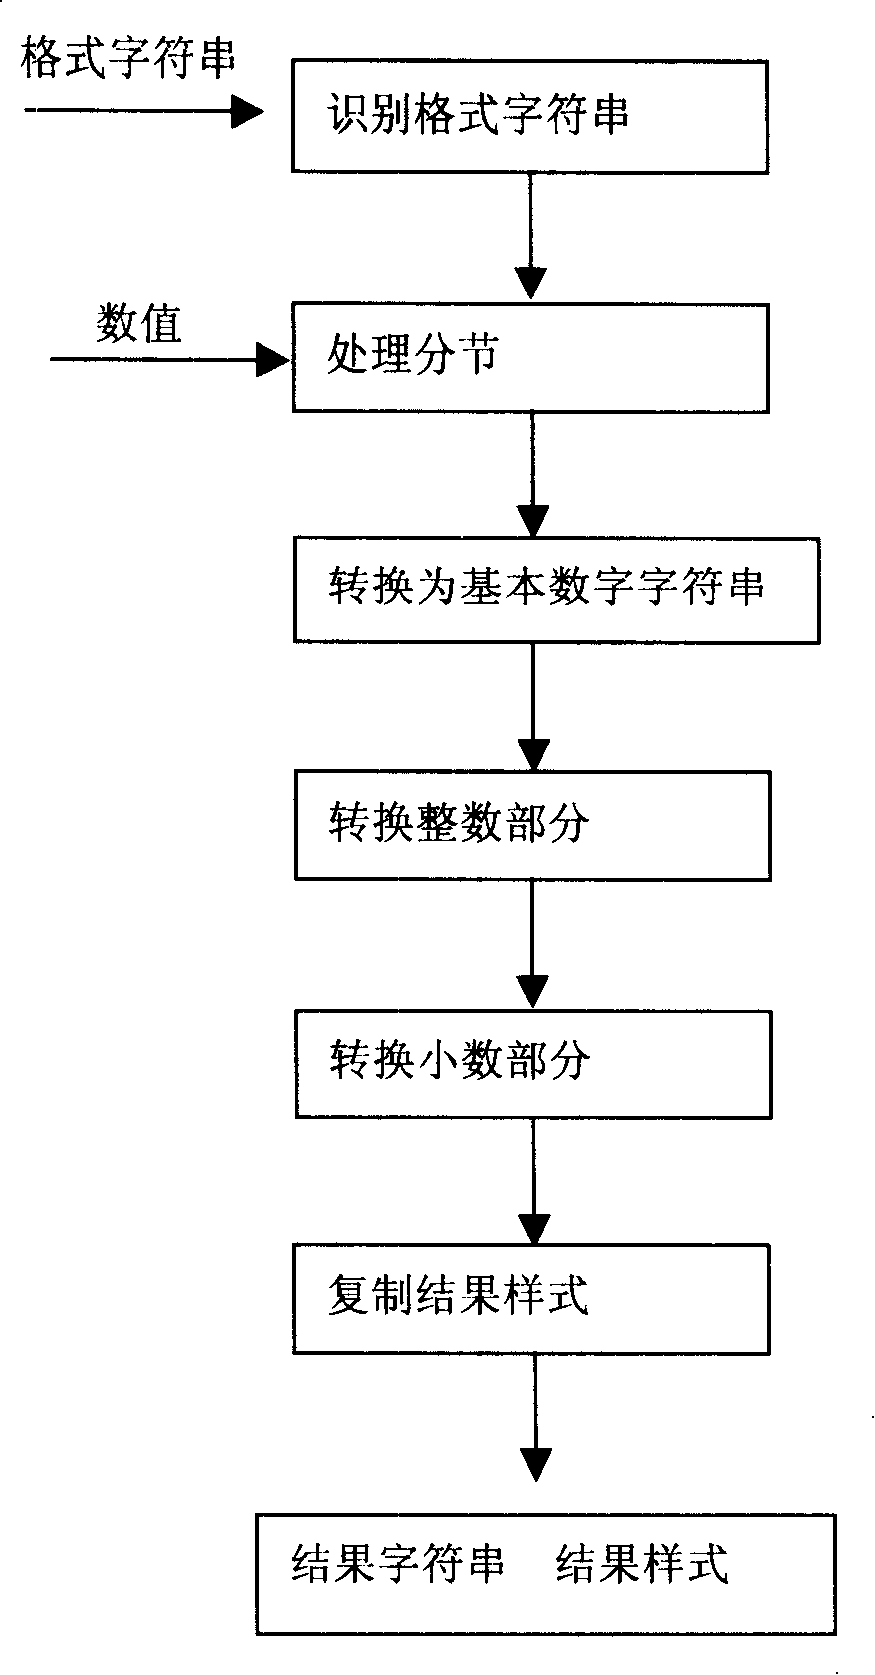 Conversion device and method for number to RMB